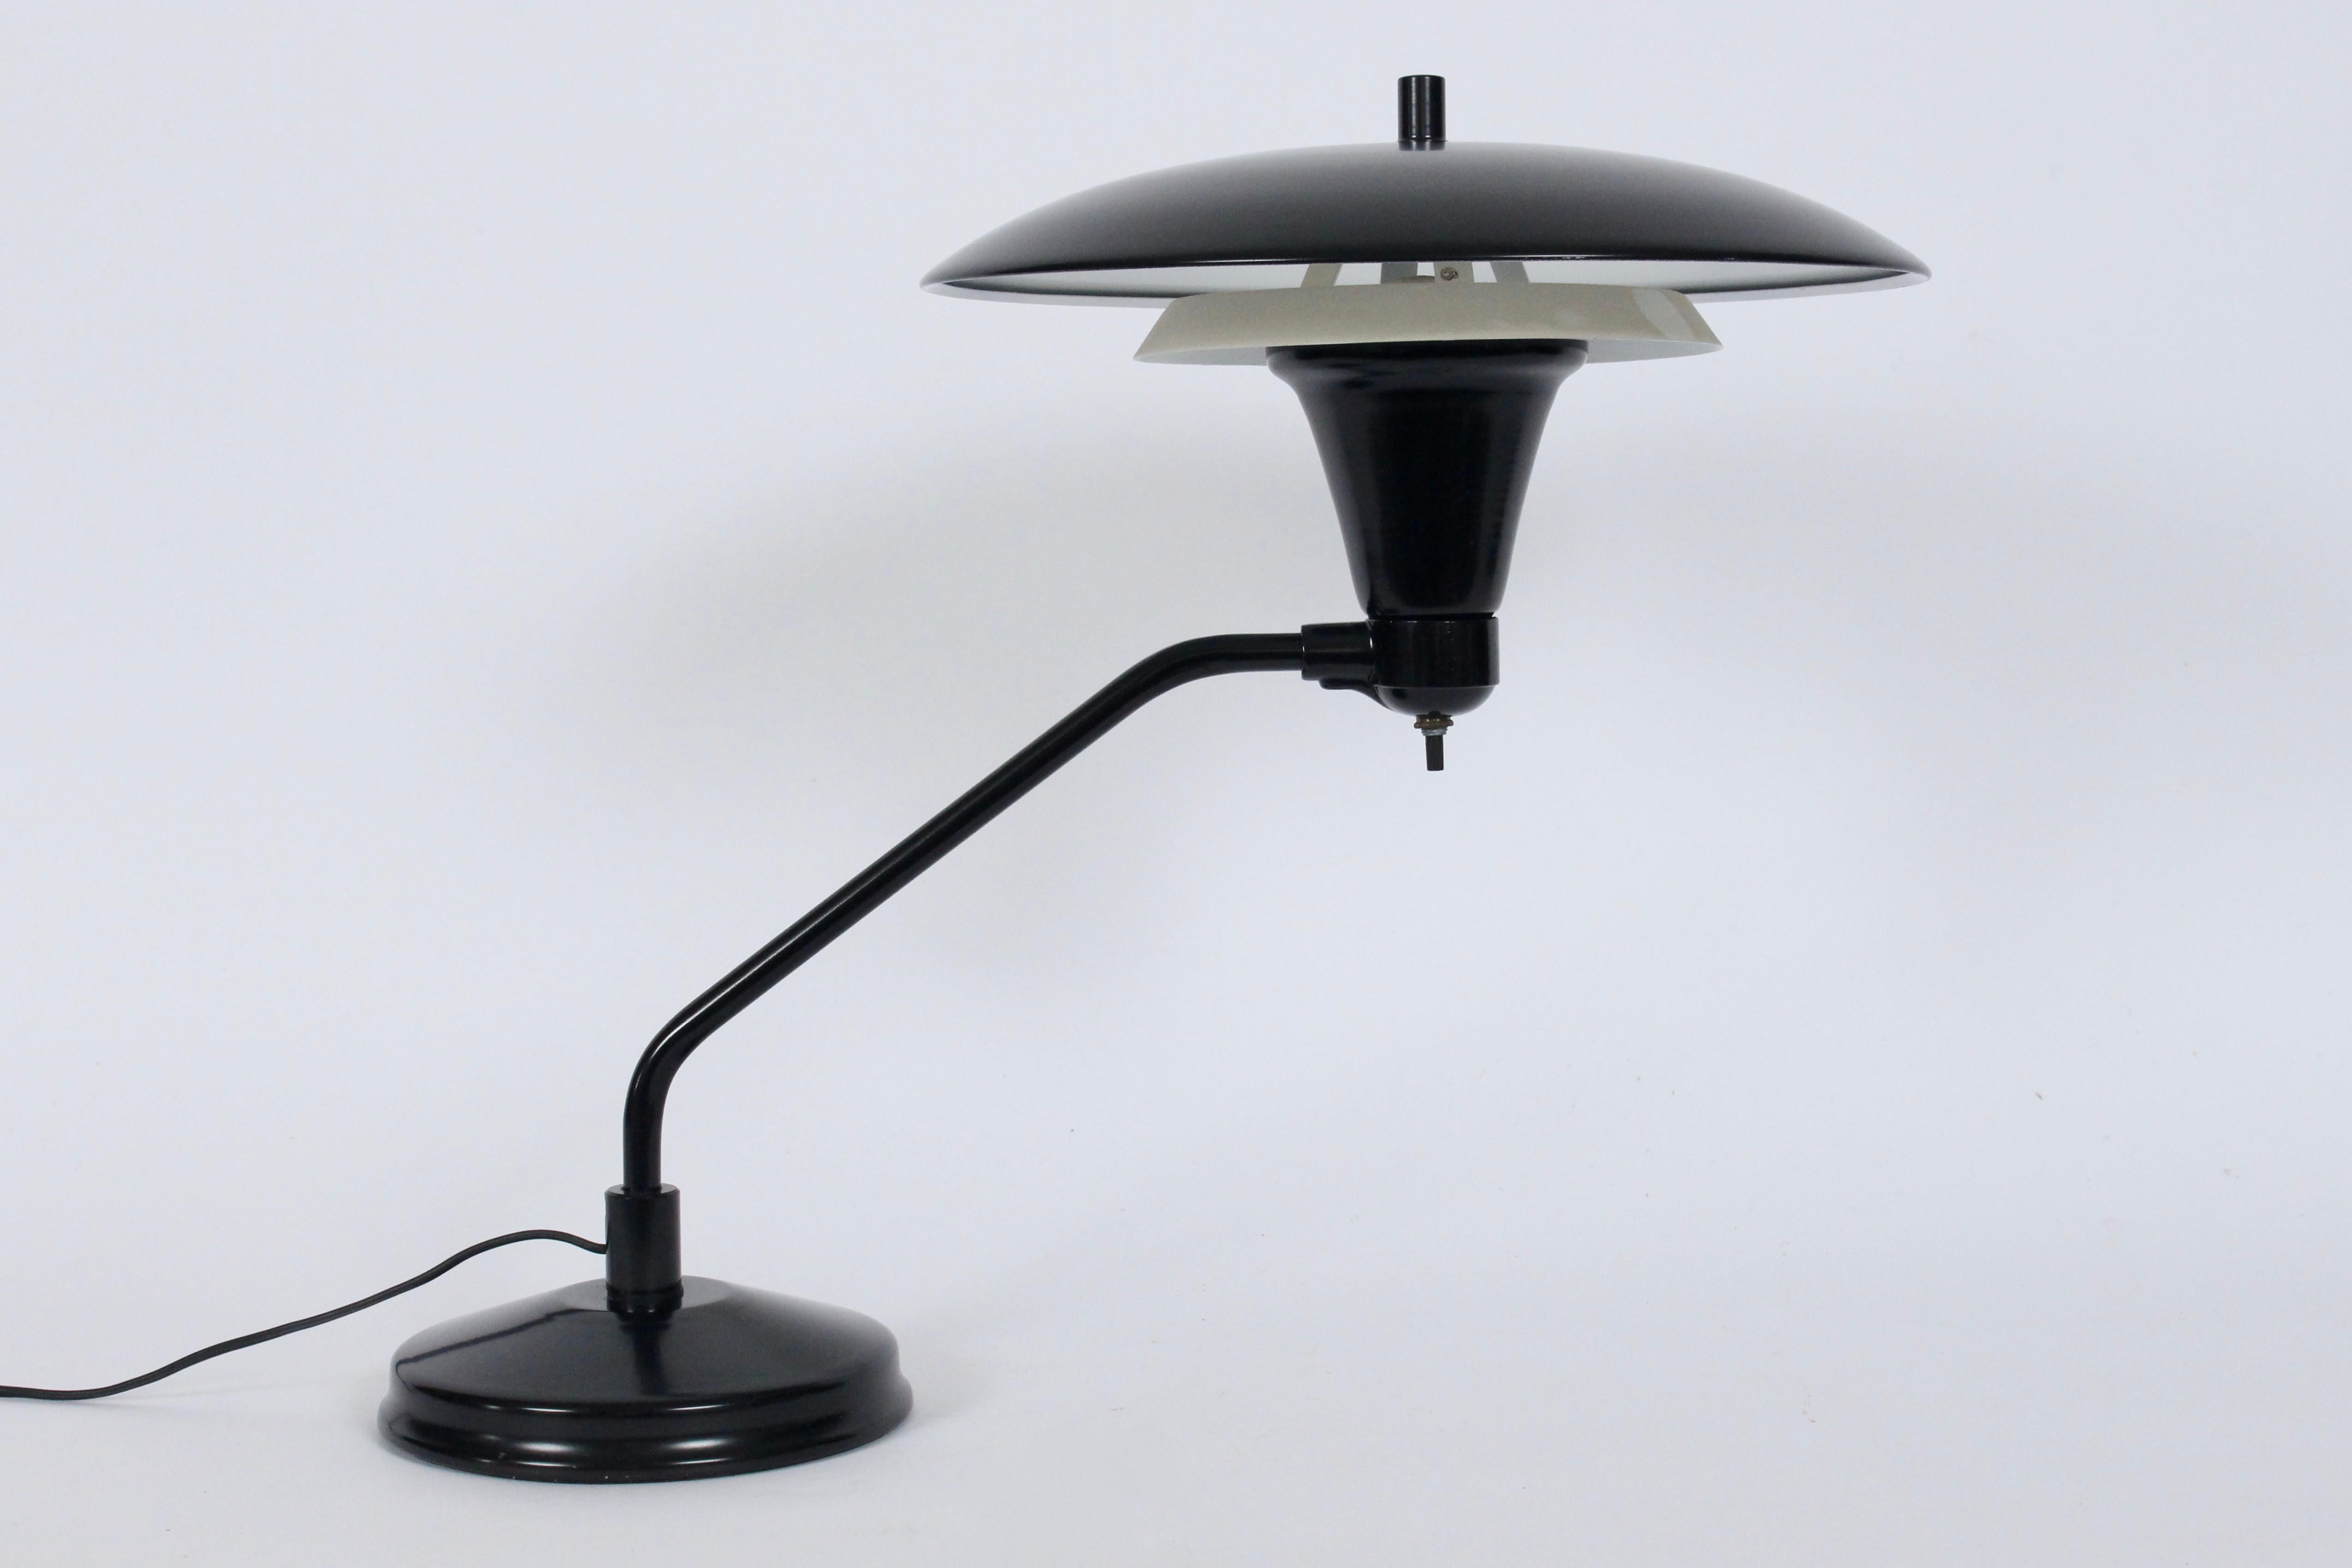 Art Specialty Co two tier black and white enamel desk lamp. Featuring a double tiered circular Shade, cantilevered arm, White enamel interior, on heavy round base. Standard socket. Wide reflective light field. Shade 13D. Base 7D. Extra fine original